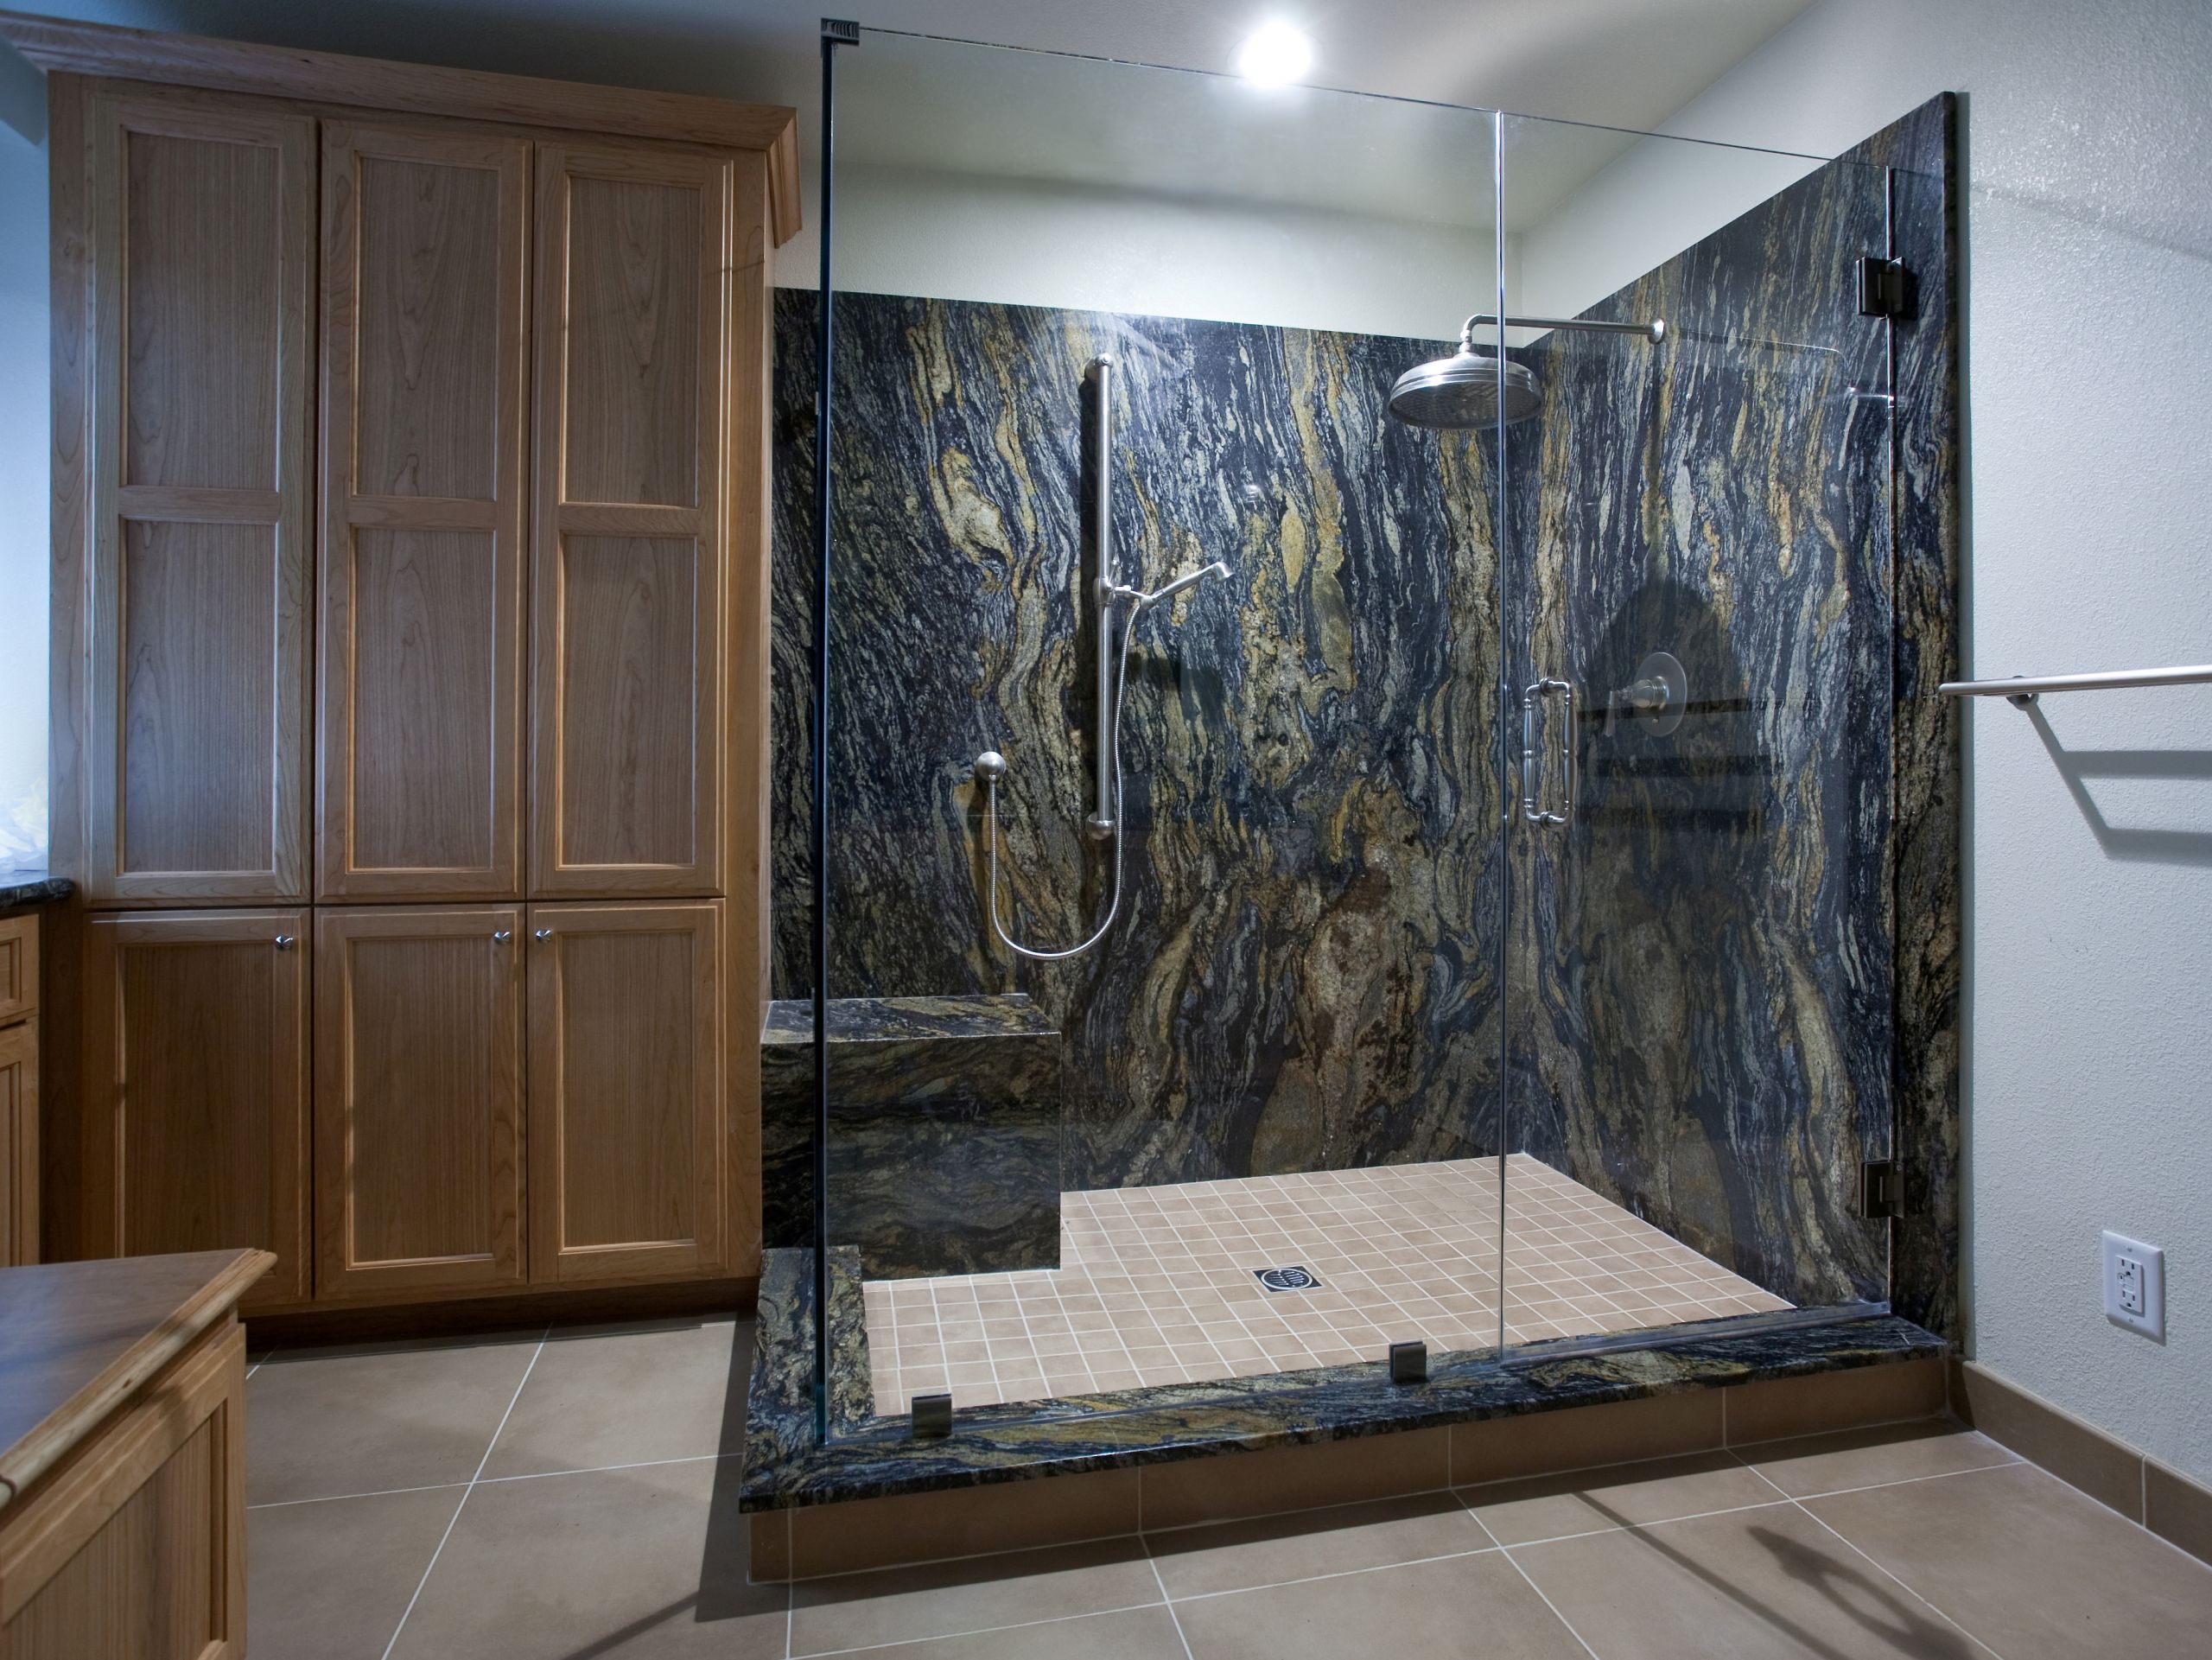 Bathroom Shower Remodel Cost
 How Much Does a Bathroom Remodel Cost Setting Realistic